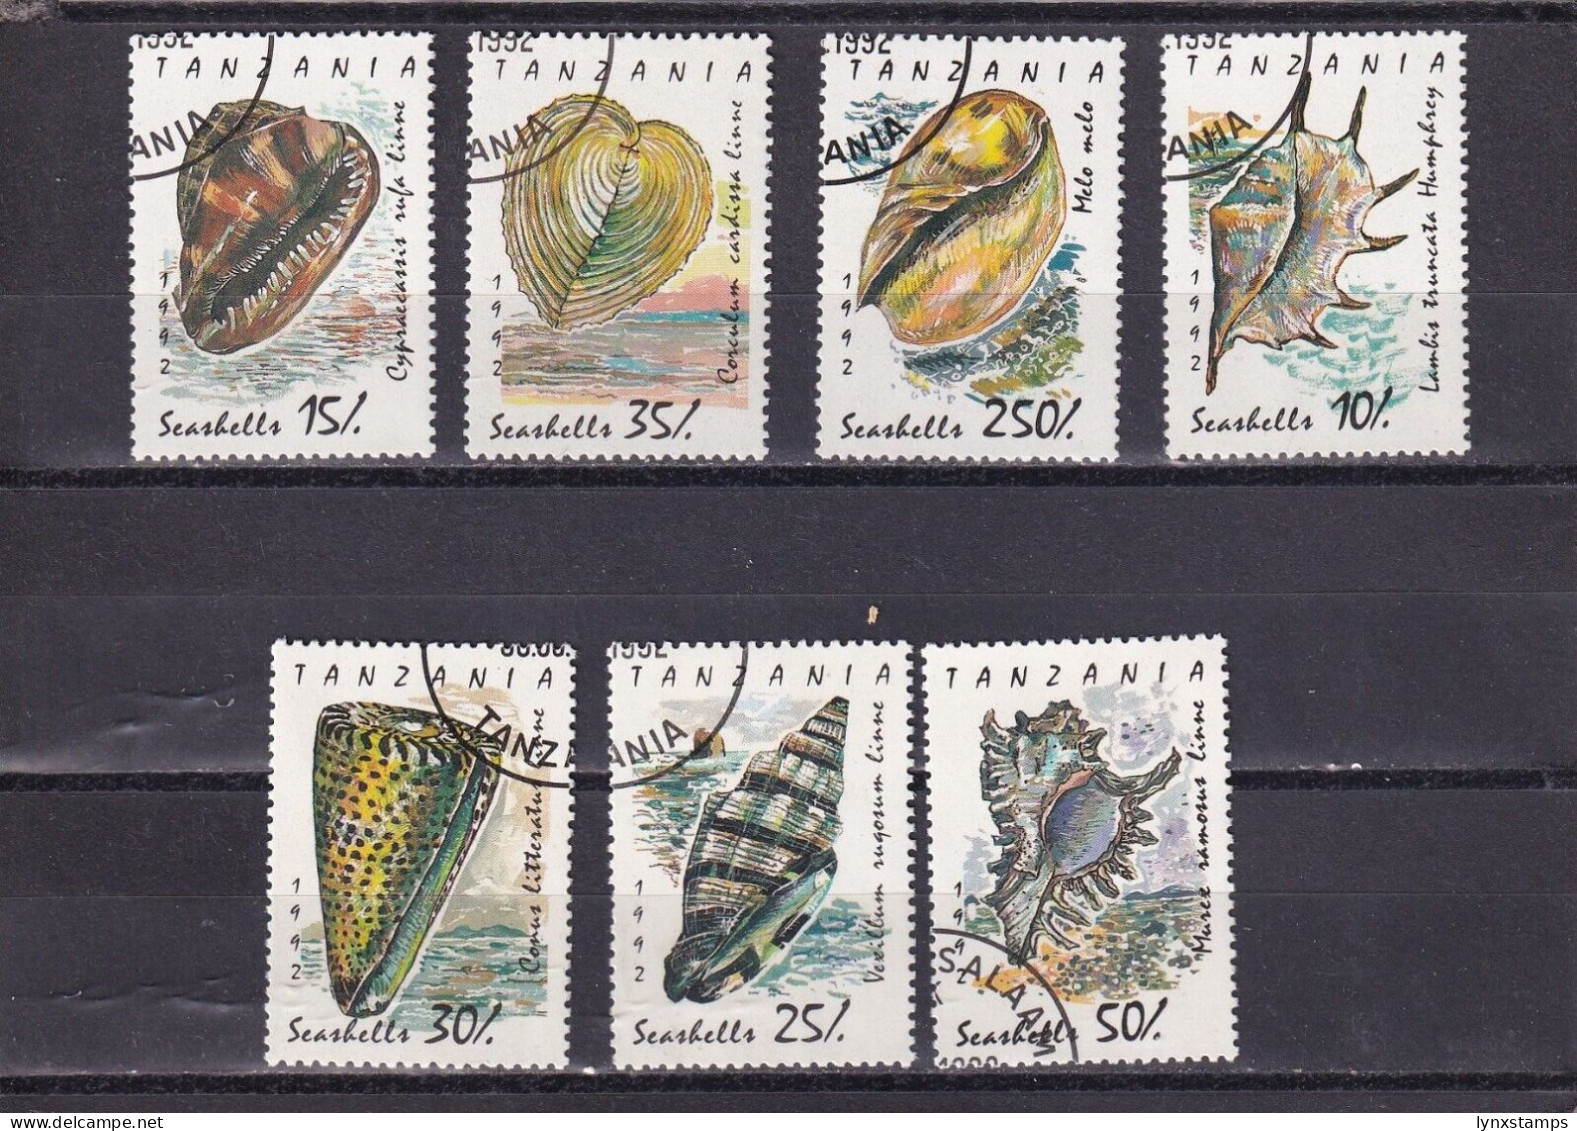 SA03 Tanzania 1992 Shells Used Stamps - Crustaceans